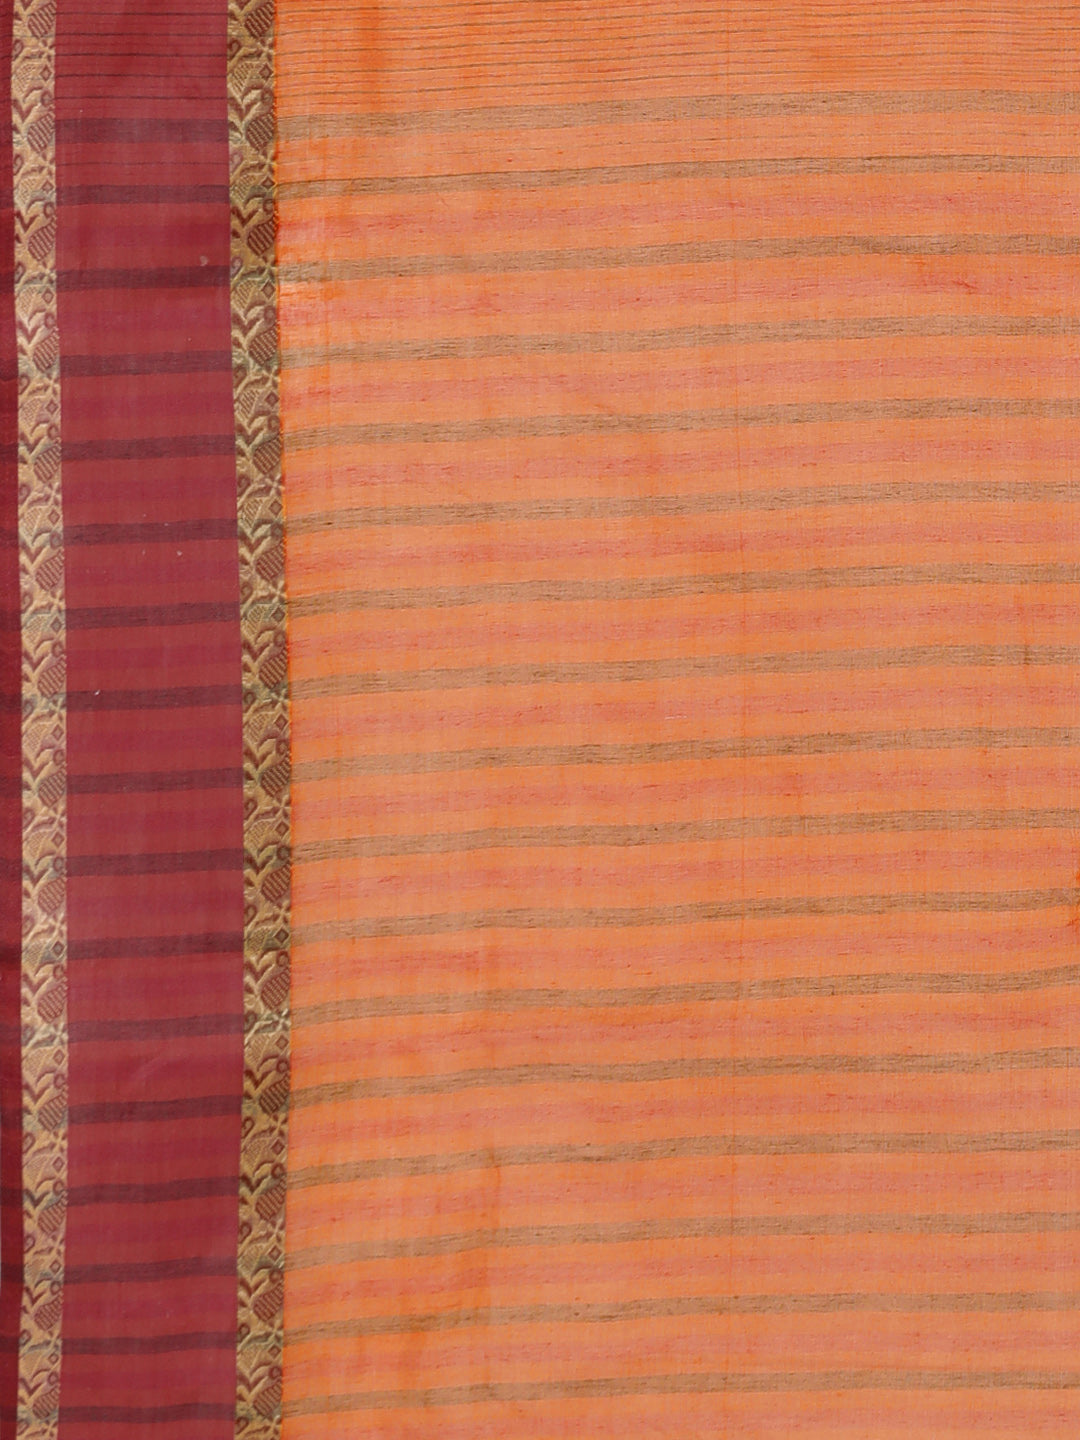 Mustard Tant Woven Design Saree Without Blouse Piece DUTASA057 DUTASA057-Saree-Kalakari India-DUTASA057-Geographical Indication, Hand Crafted, Heritage Prints, Natural Dyes, Sarees, Silk Cotton, Sustainable Fabrics, Taant, Tant, West Bengal, Woven-[Linen,Ethnic,wear,Fashionista,Handloom,Handicraft,Indigo,blockprint,block,print,Cotton,Chanderi,Blue, latest,classy,party,bollywood,trendy,summer,style,traditional,formal,elegant,unique,style,hand,block,print, dabu,booti,gift,present,glamorous,afforda